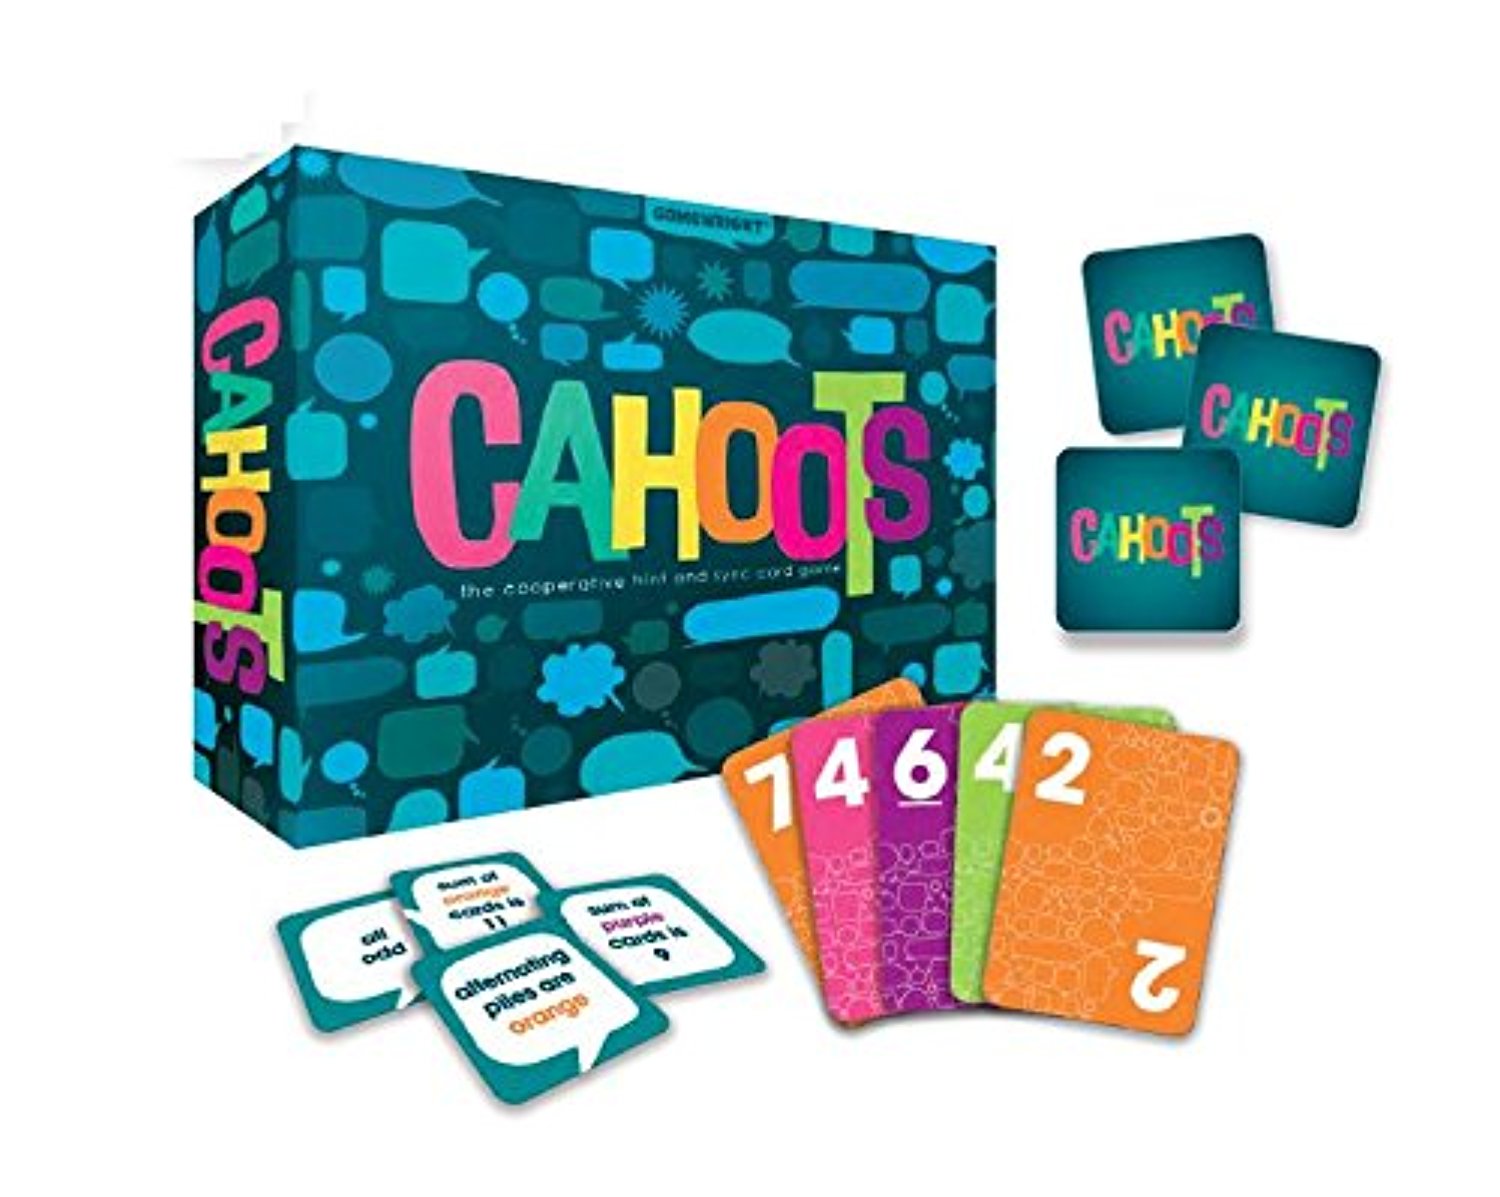 Cahoots - Brainwright - the Cooperative Hint and Sync Card Game - image 3 of 3